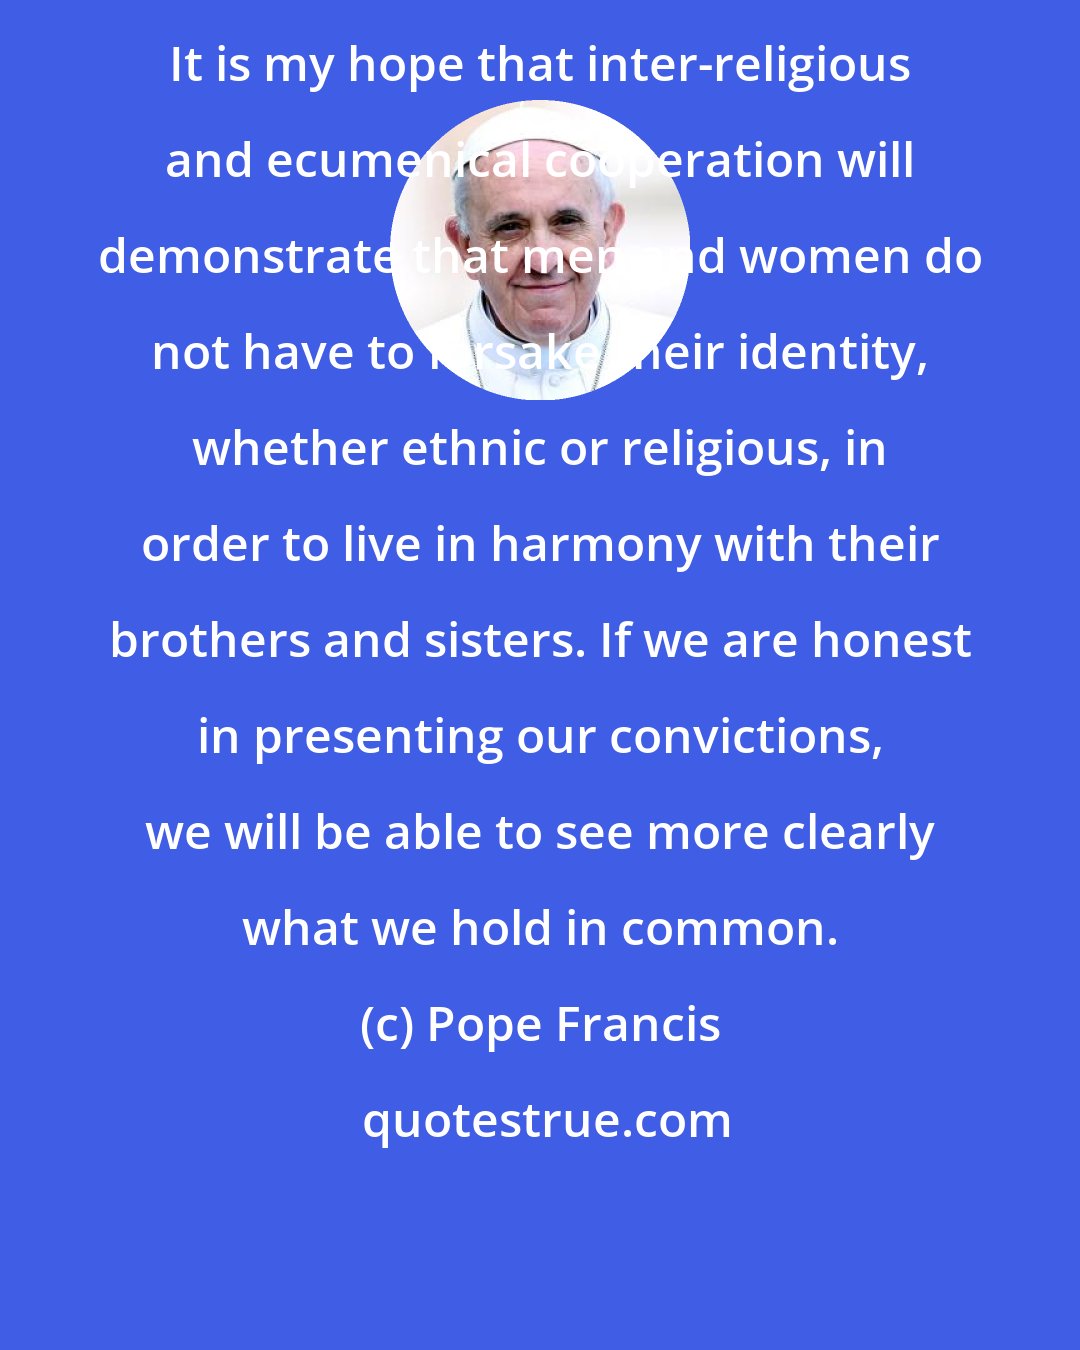 Pope Francis: It is my hope that inter-religious and ecumenical cooperation will demonstrate that men and women do not have to forsake their identity, whether ethnic or religious, in order to live in harmony with their brothers and sisters. If we are honest in presenting our convictions, we will be able to see more clearly what we hold in common.